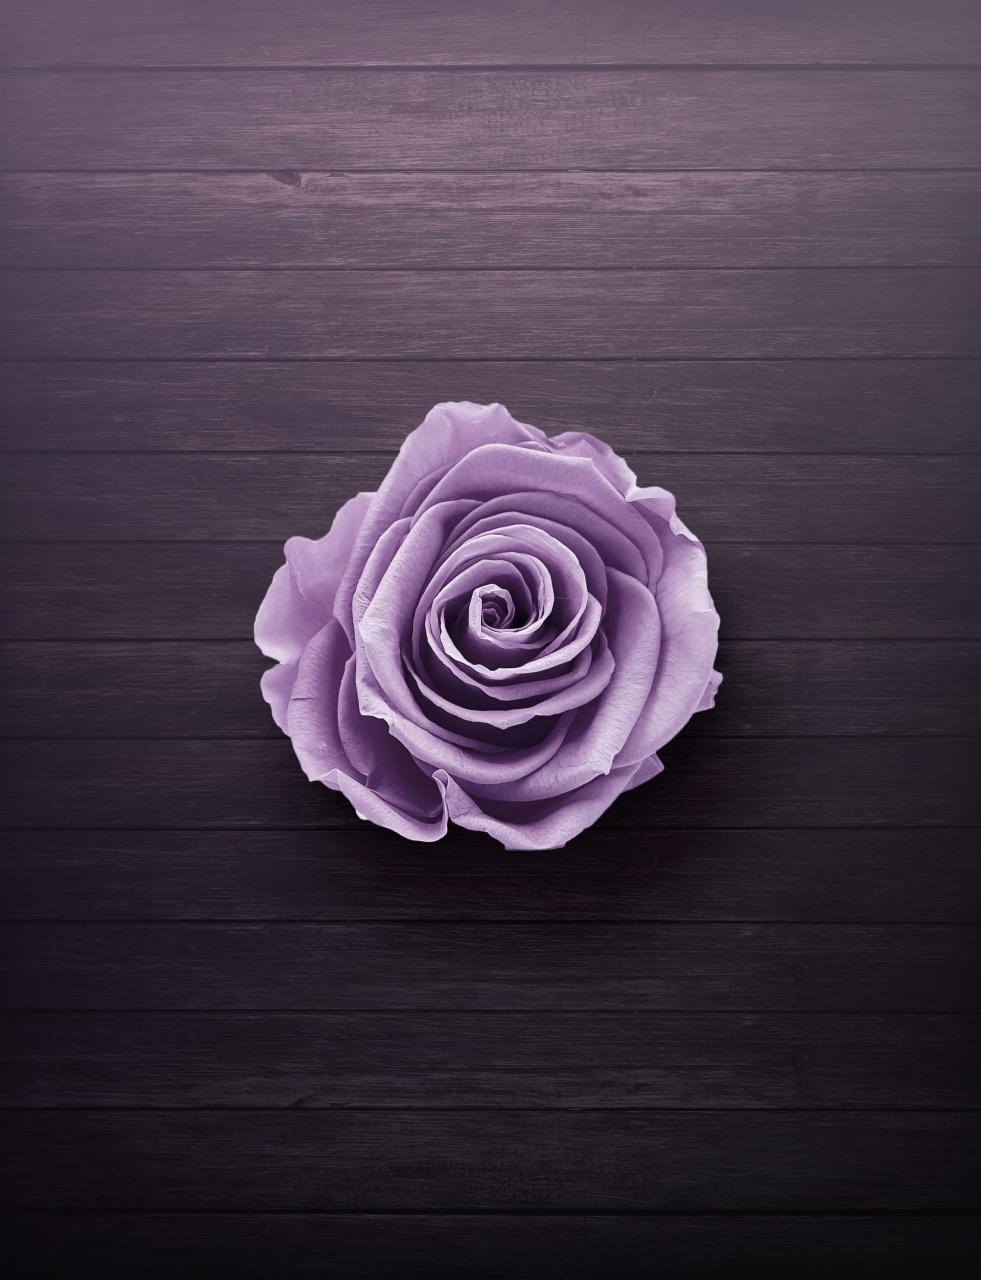 Purple Rose On Wooden Surface